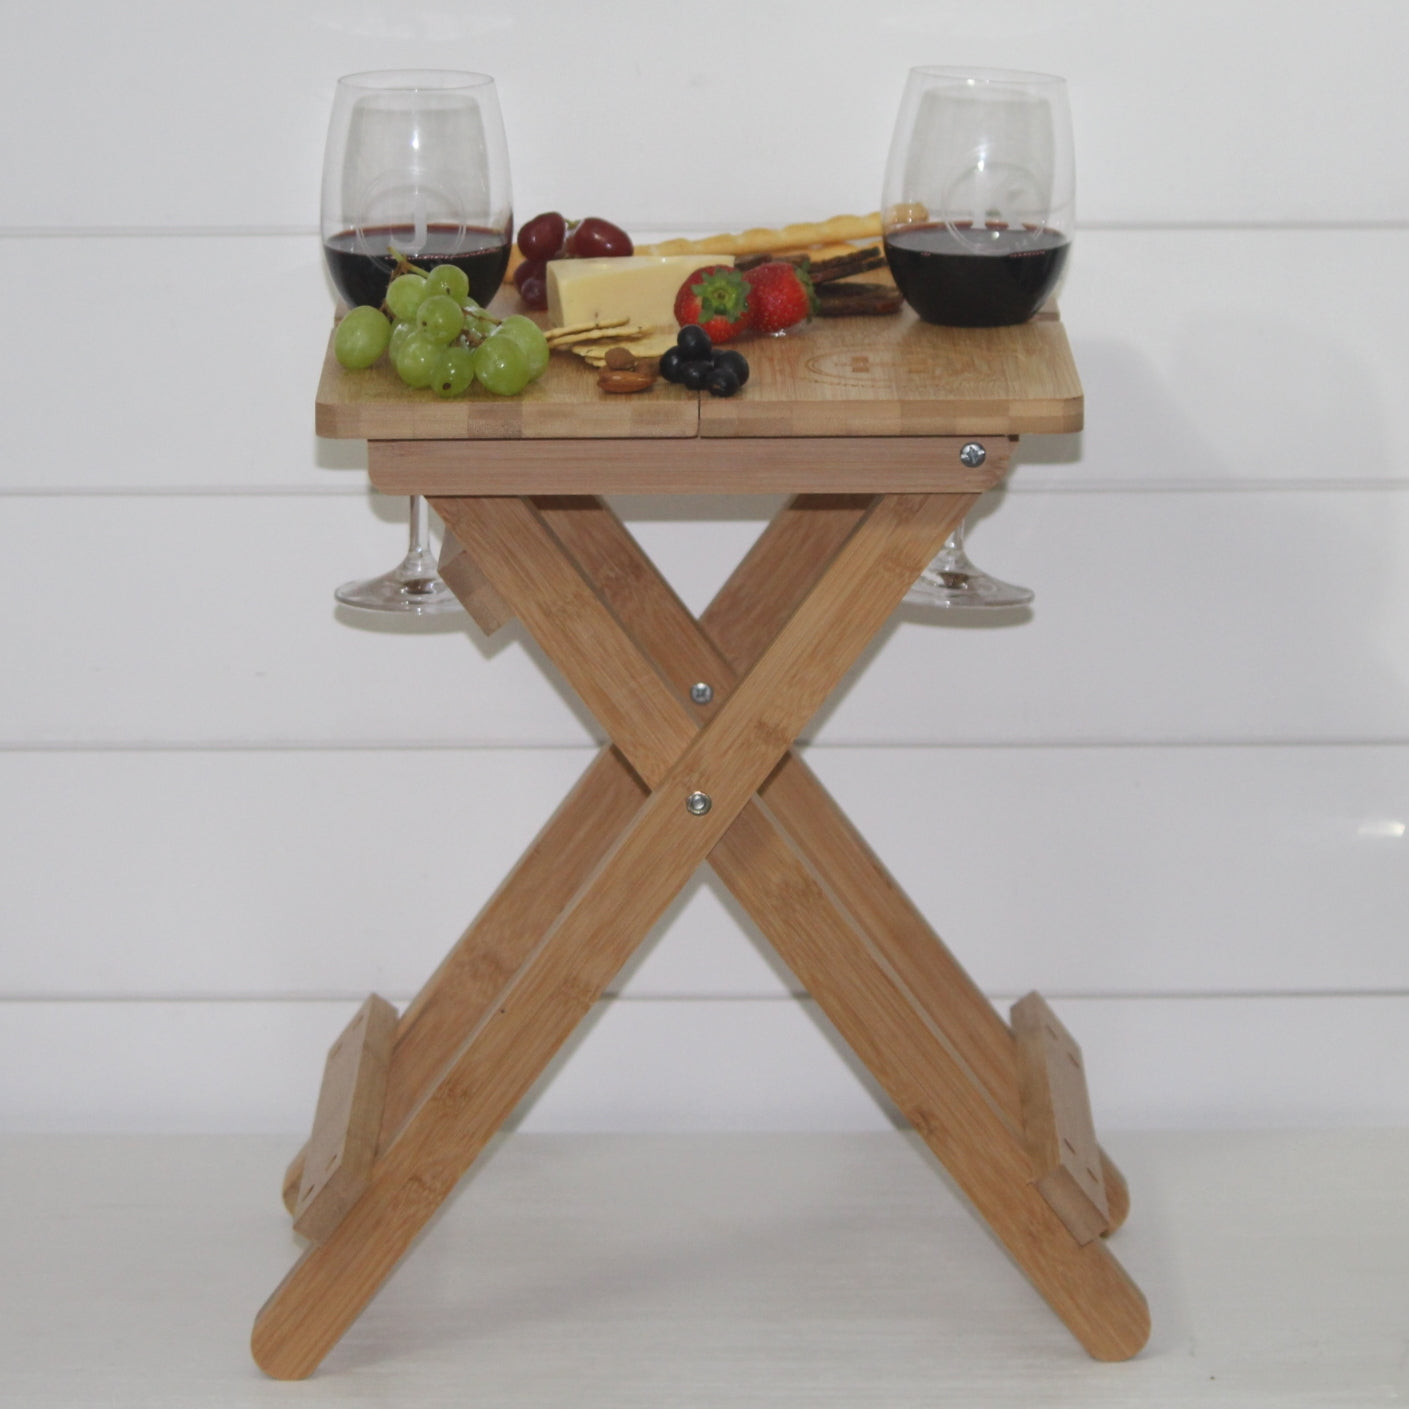 The Lakeside Picnic Table Set - With 2 Wine Glasses